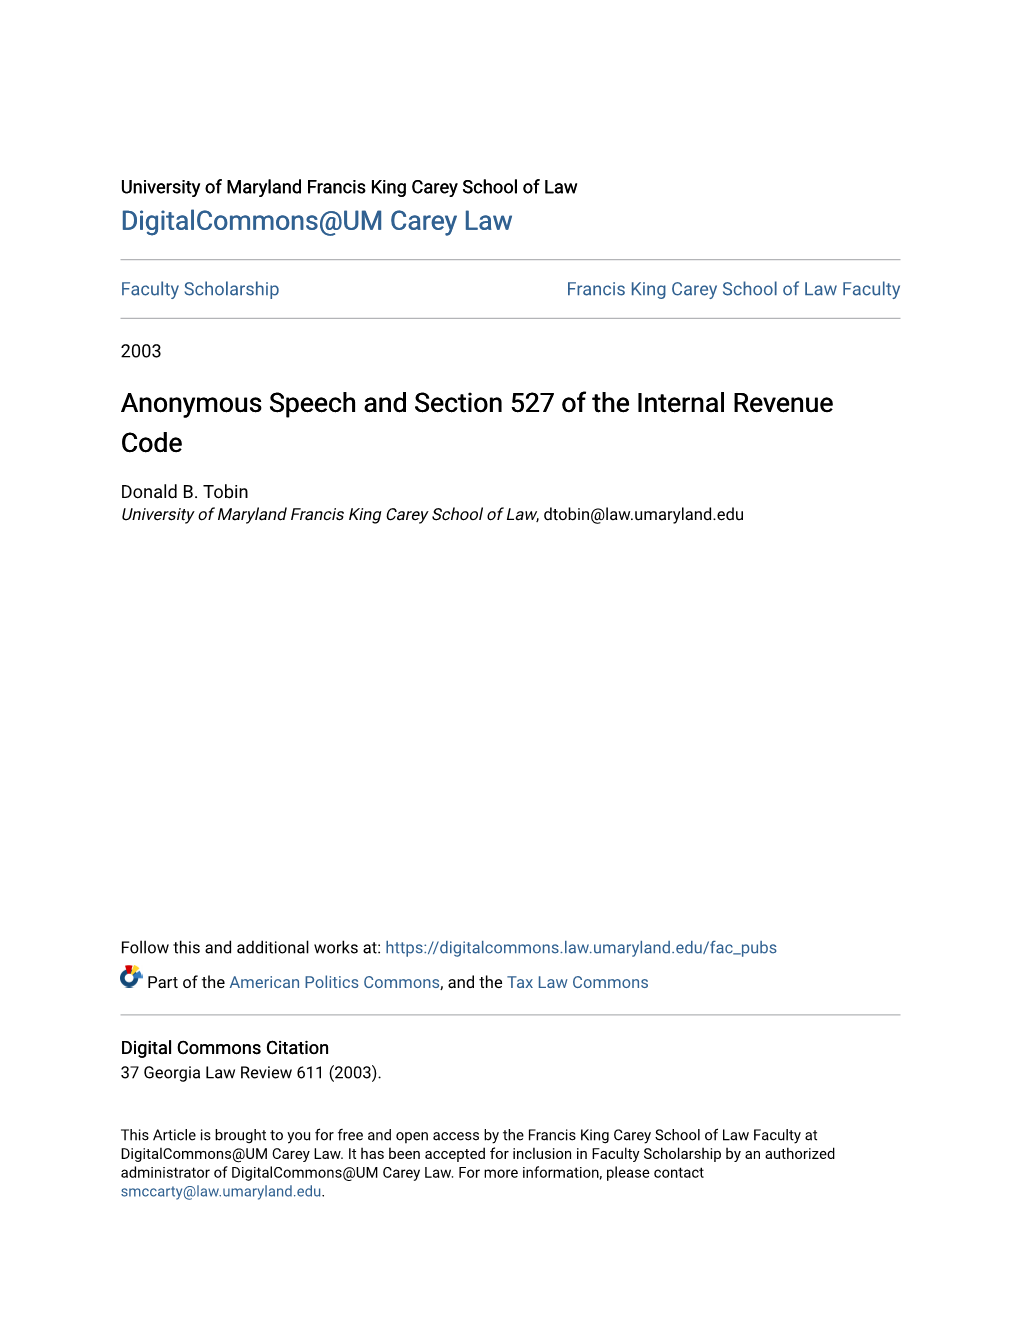 Anonymous Speech and Section 527 of the Internal Revenue Code